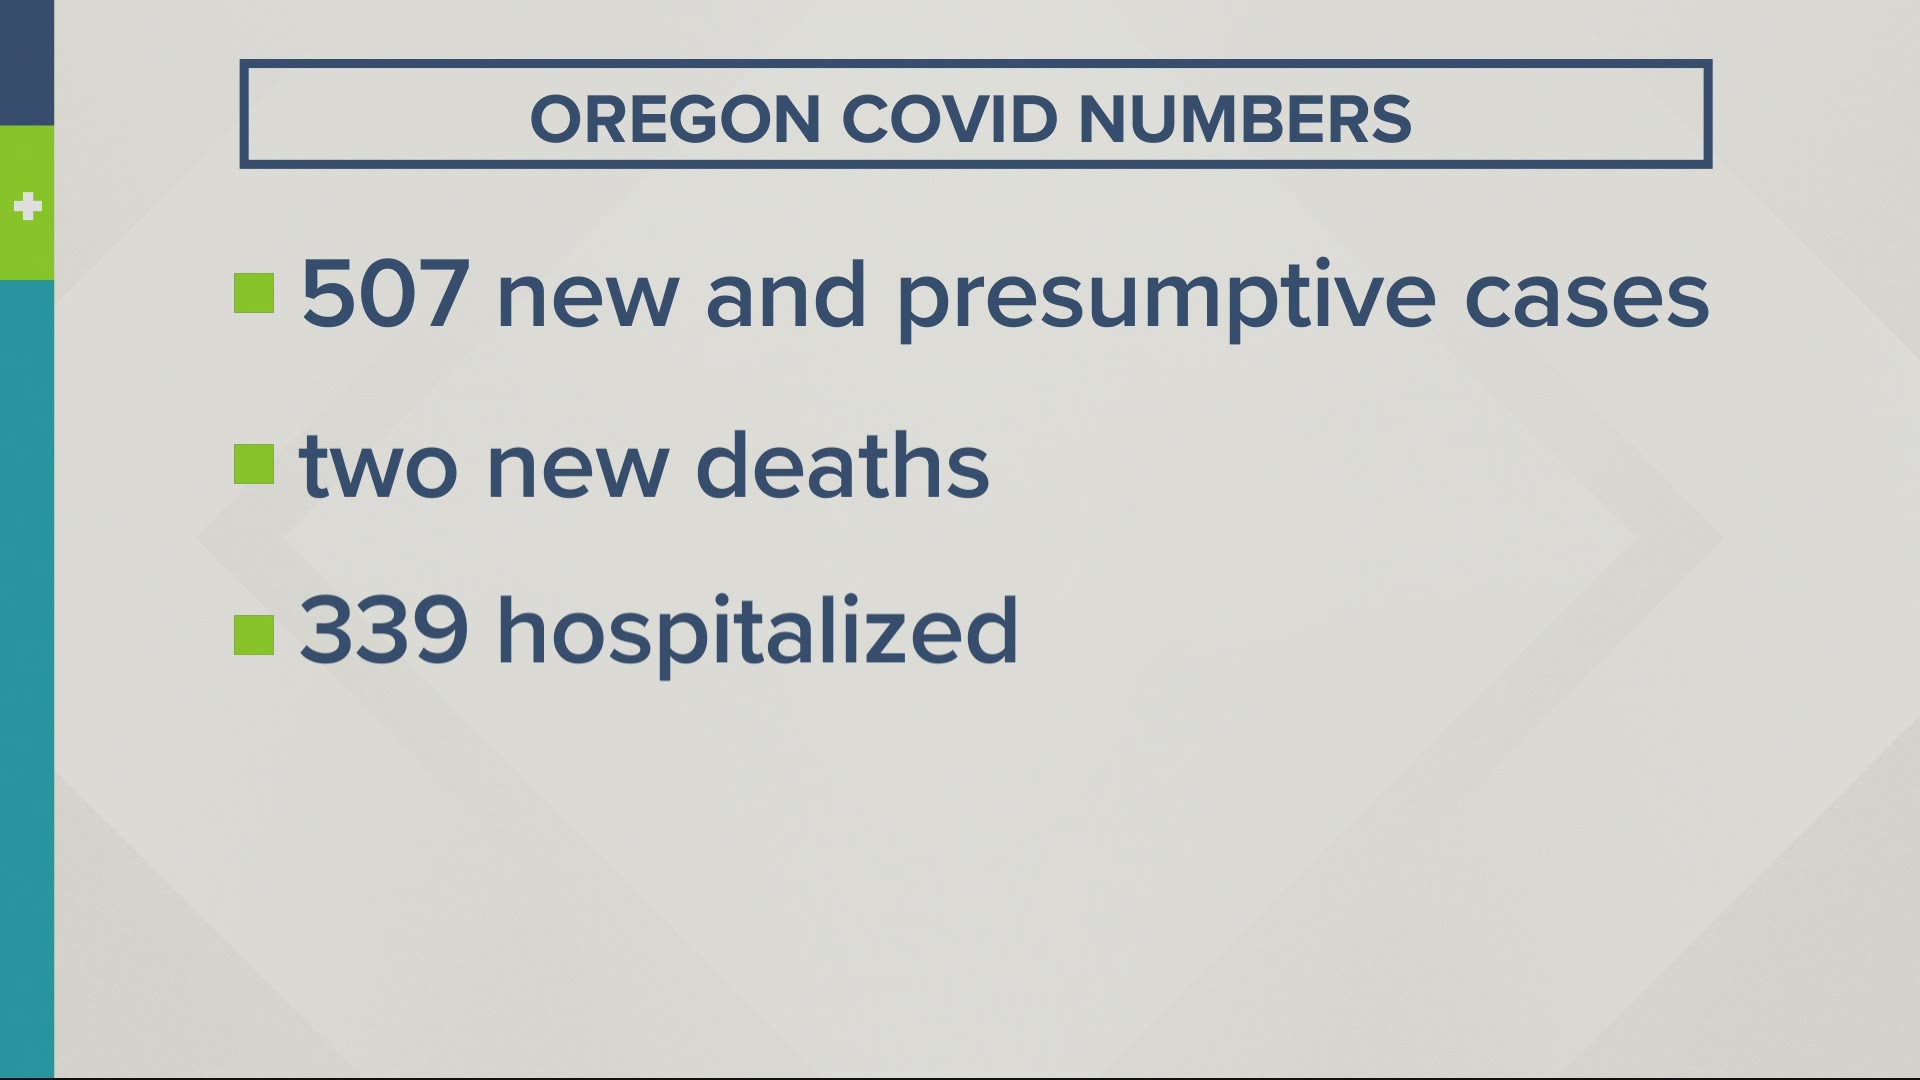 Oregon Health Authority announced on Sunday that there were 507 new presumptive and positive COVID-19 cases in the state and two more deaths related to the virus.